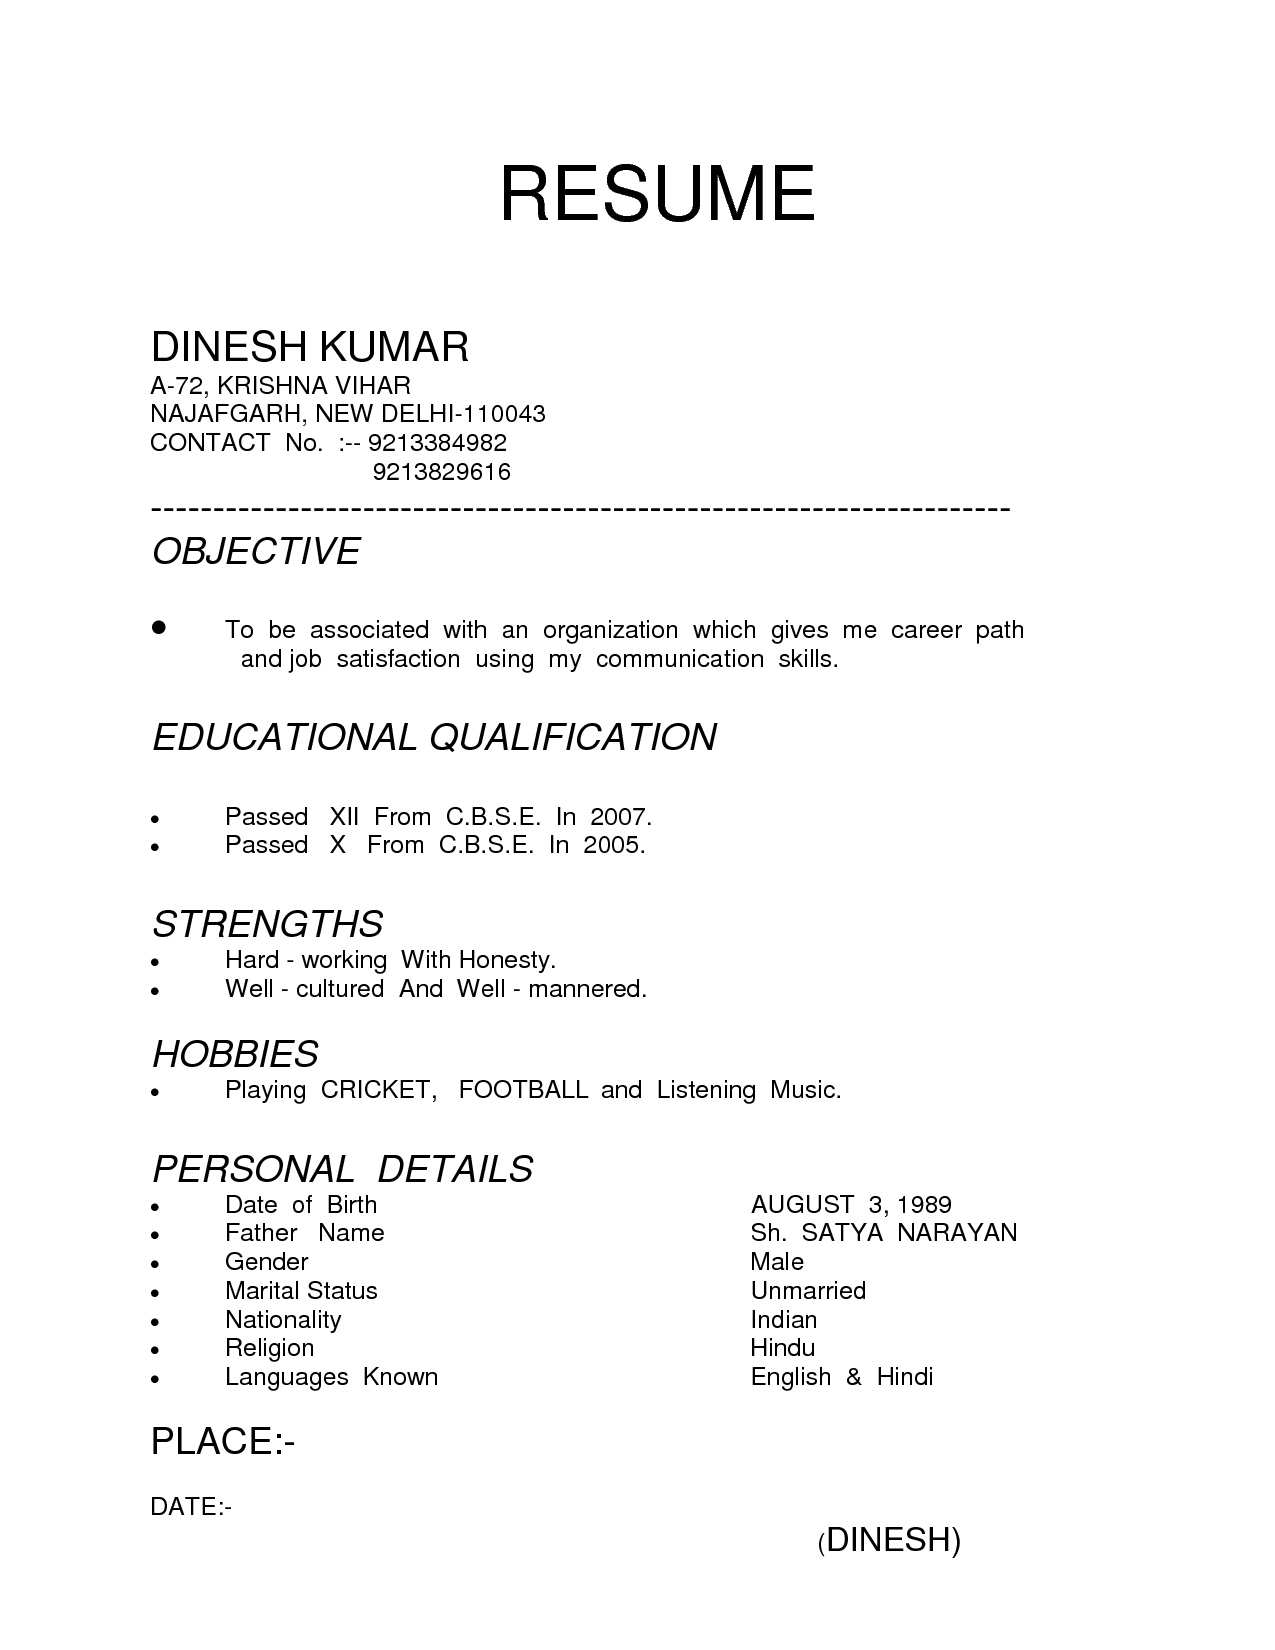 How To Type A Resume Best Types Of Resumes To Use Inspirational 4 Different Types Of Resumes Of Best Types Of Resumes To Use how to type a resume|wikiresume.com